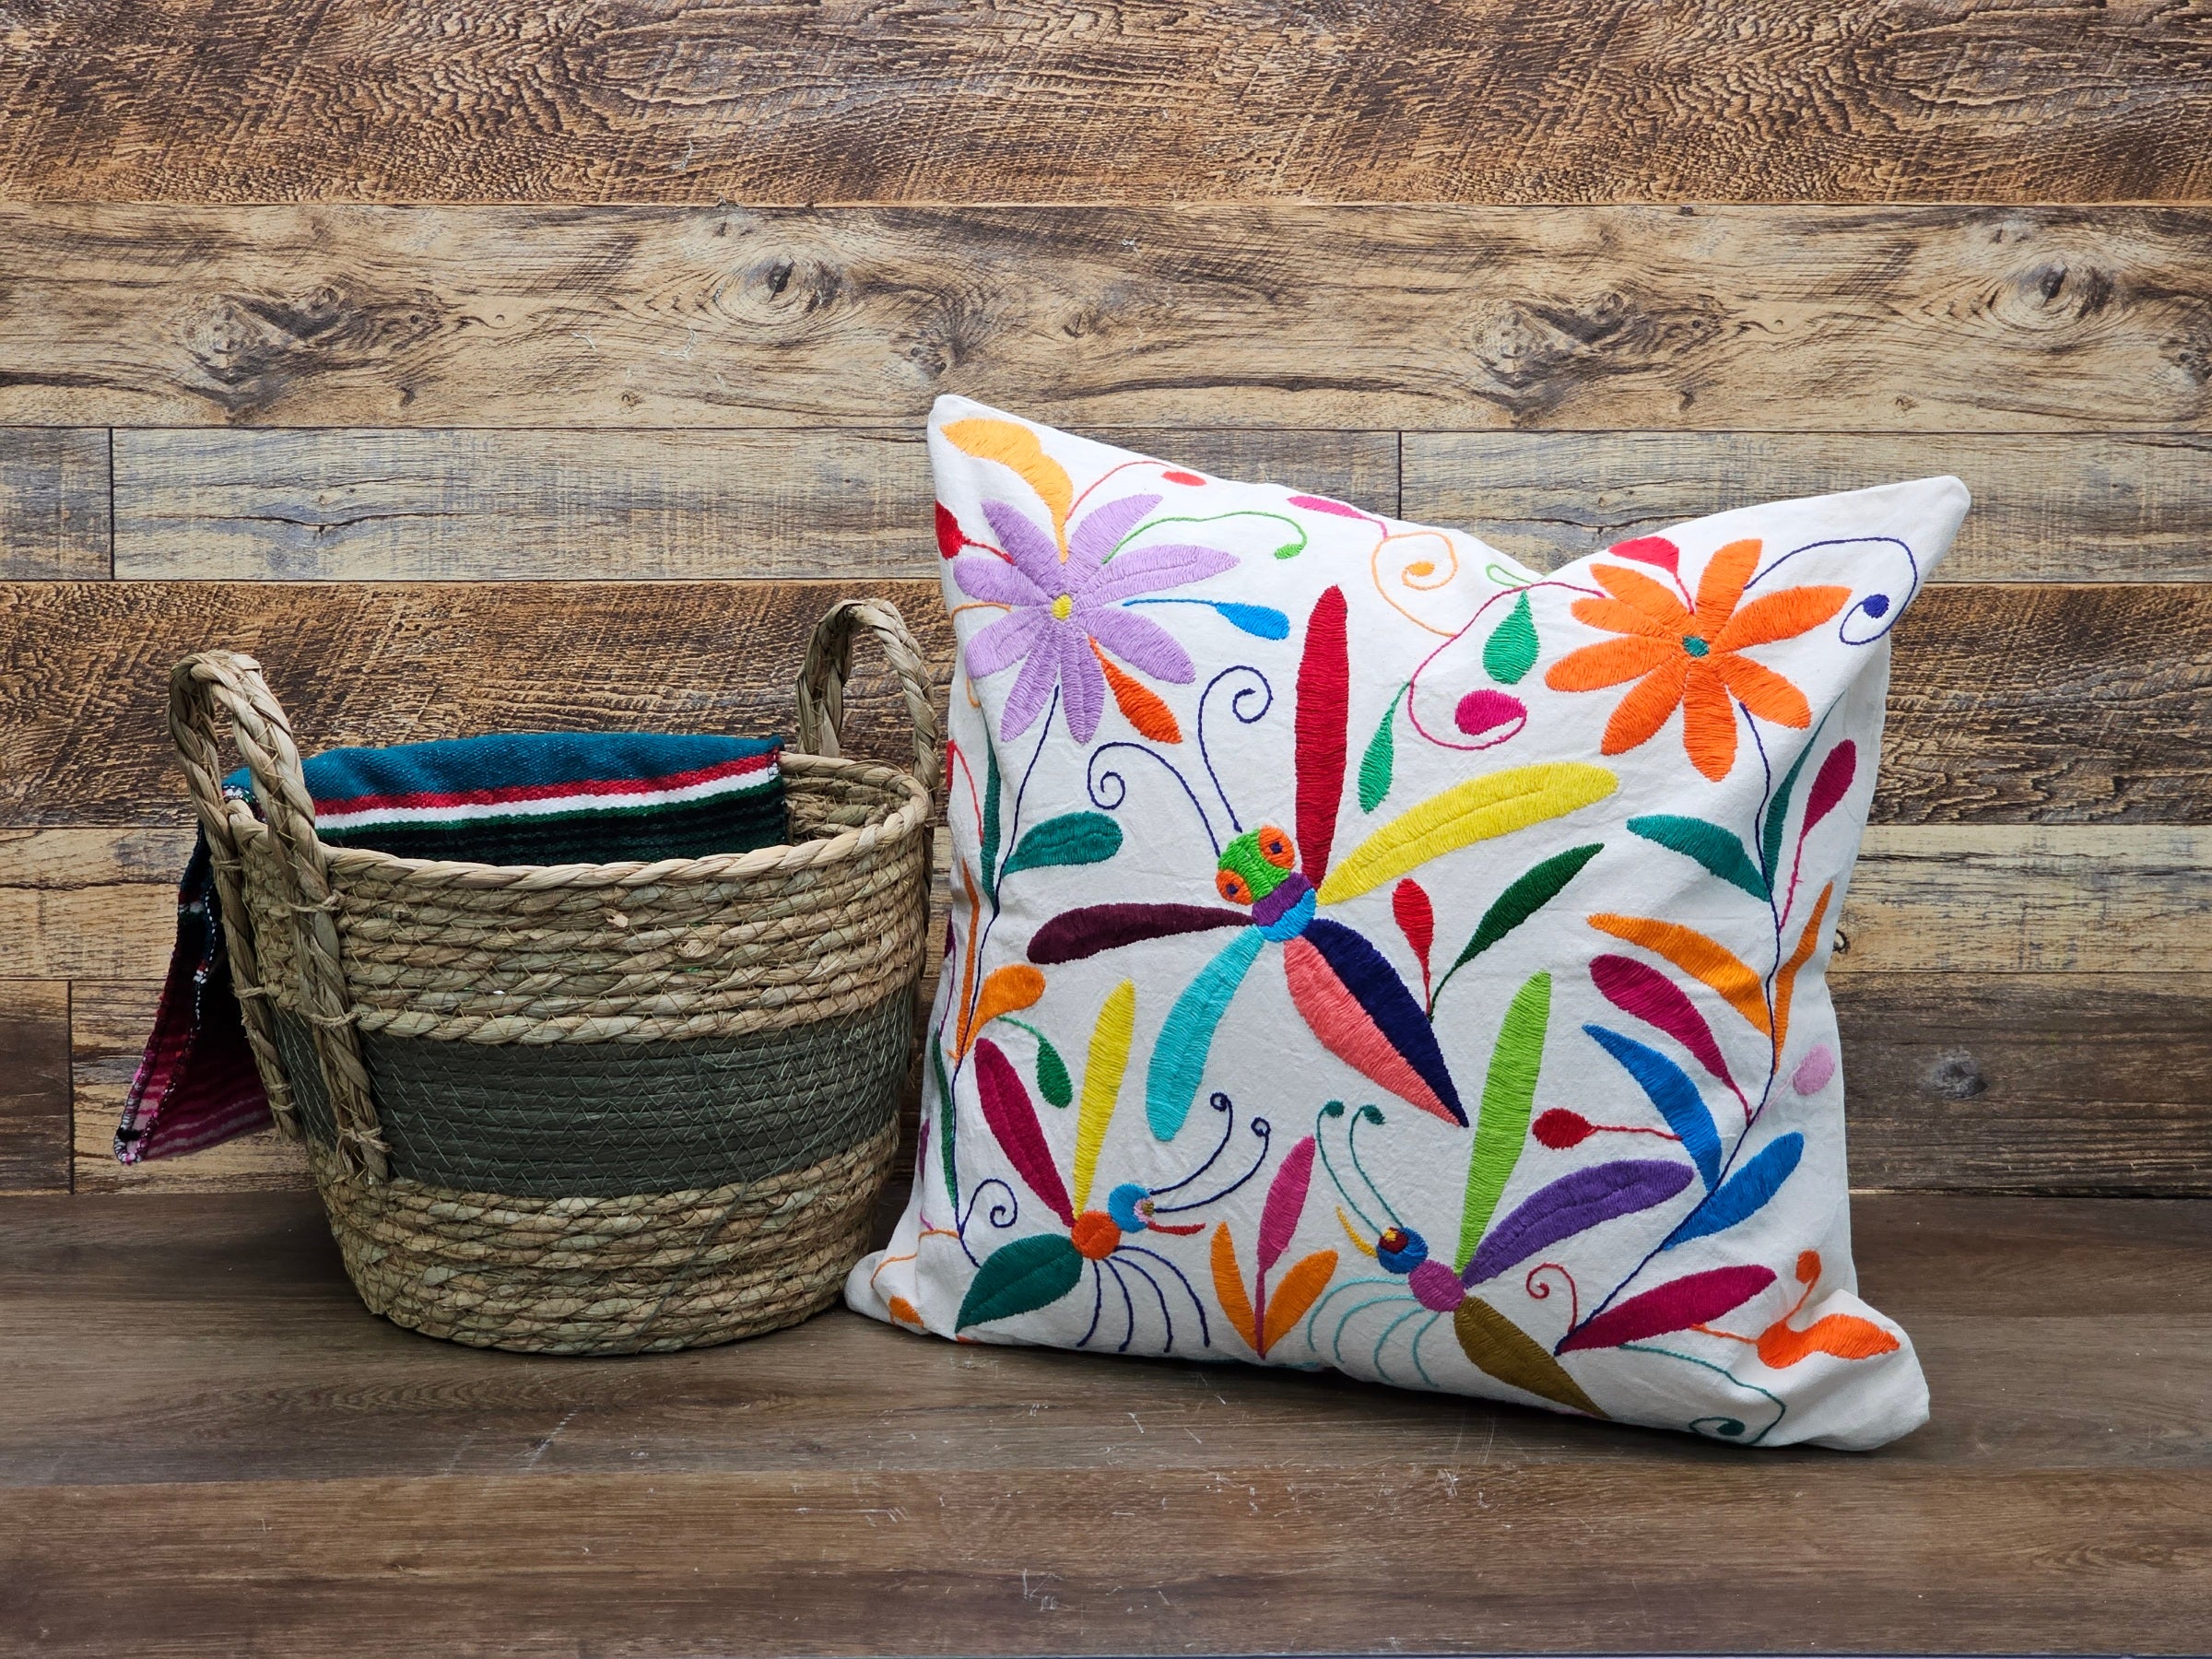 Square Otomi Tenango Pillow Cover with Hand Embroidered Dragonfly and Flower Design in Vibrant Colors. Handmade in Mexico. Ships from the USA. Buy now at www.felipeandgrace.com.